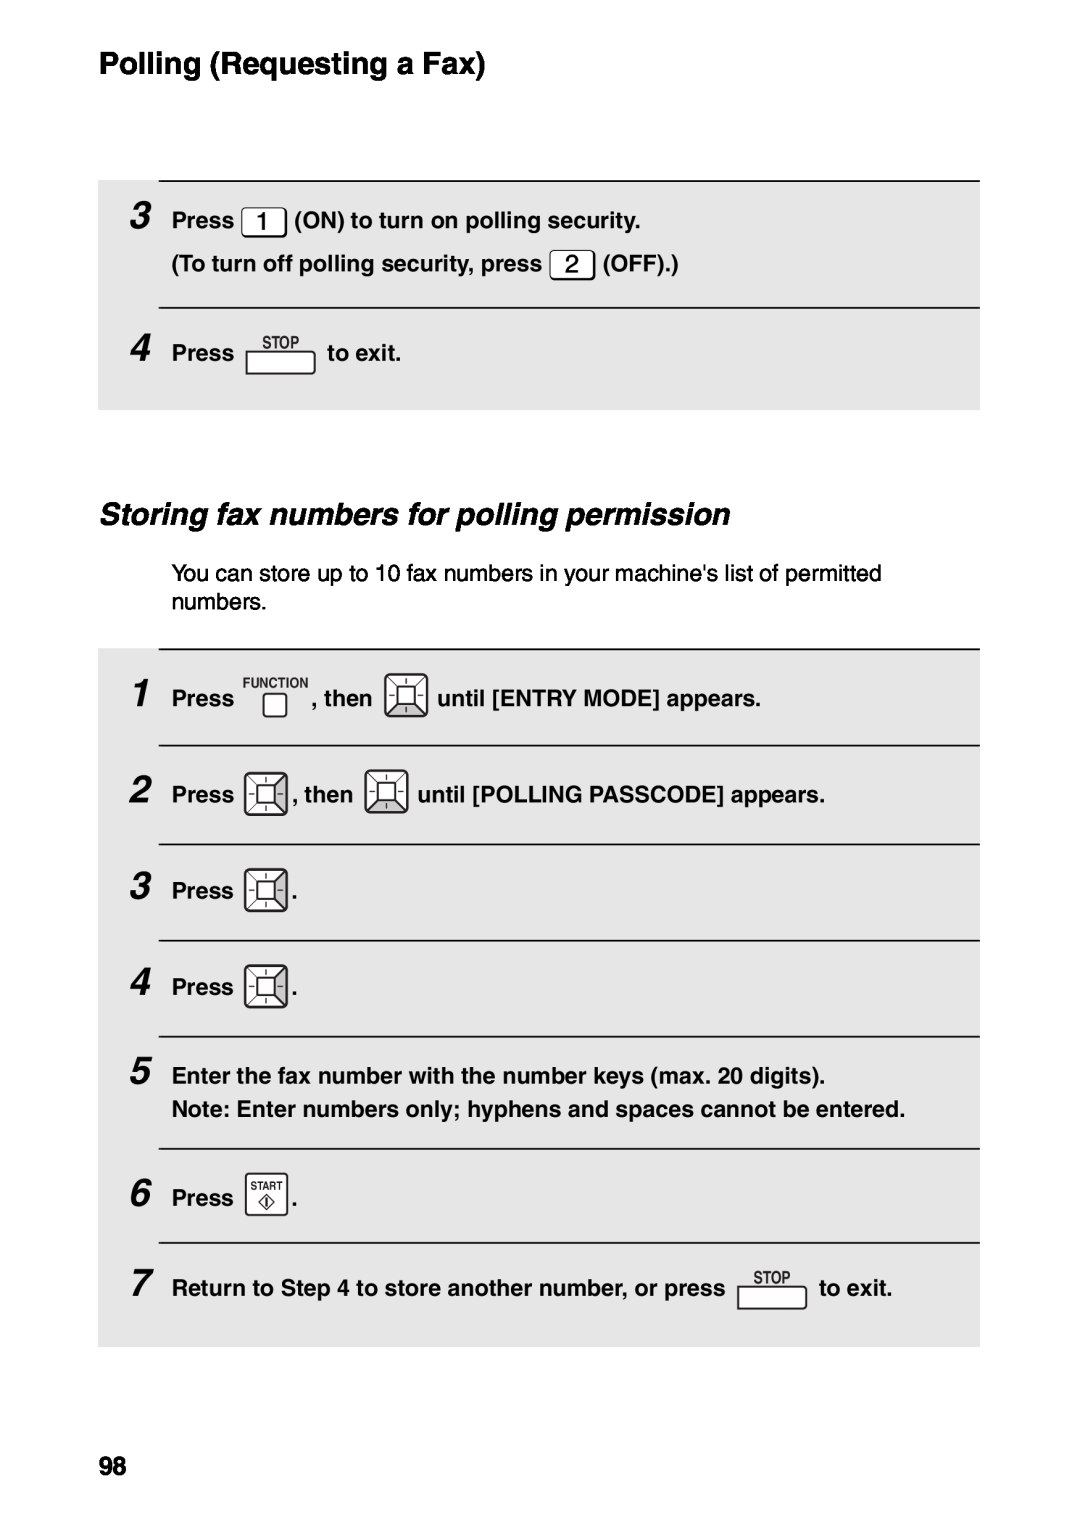 Sharp FO-IS115N operation manual Storing fax numbers for polling permission 